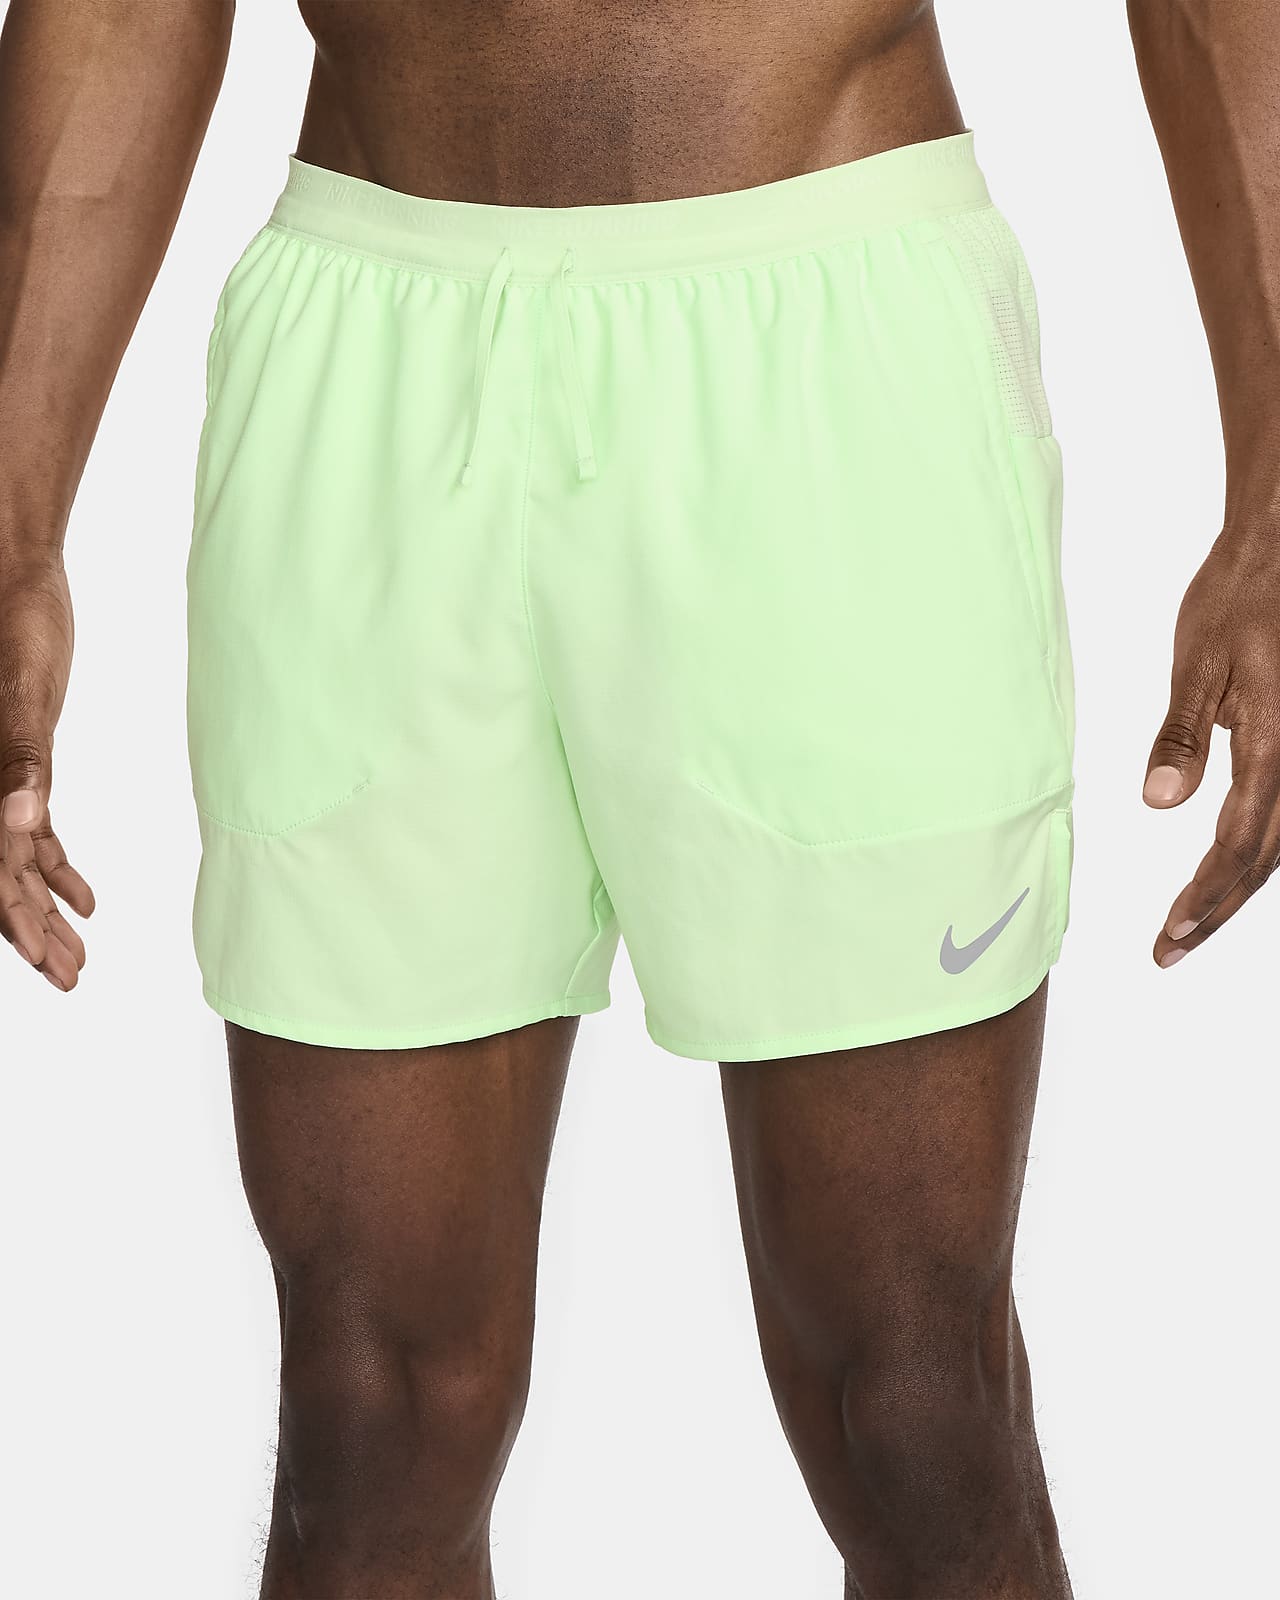 Nike Dri-FIT Running Division Women's High-Waisted 7.5cm (approx.)  Brief-Lined Running Shorts with Pockets. Nike CA